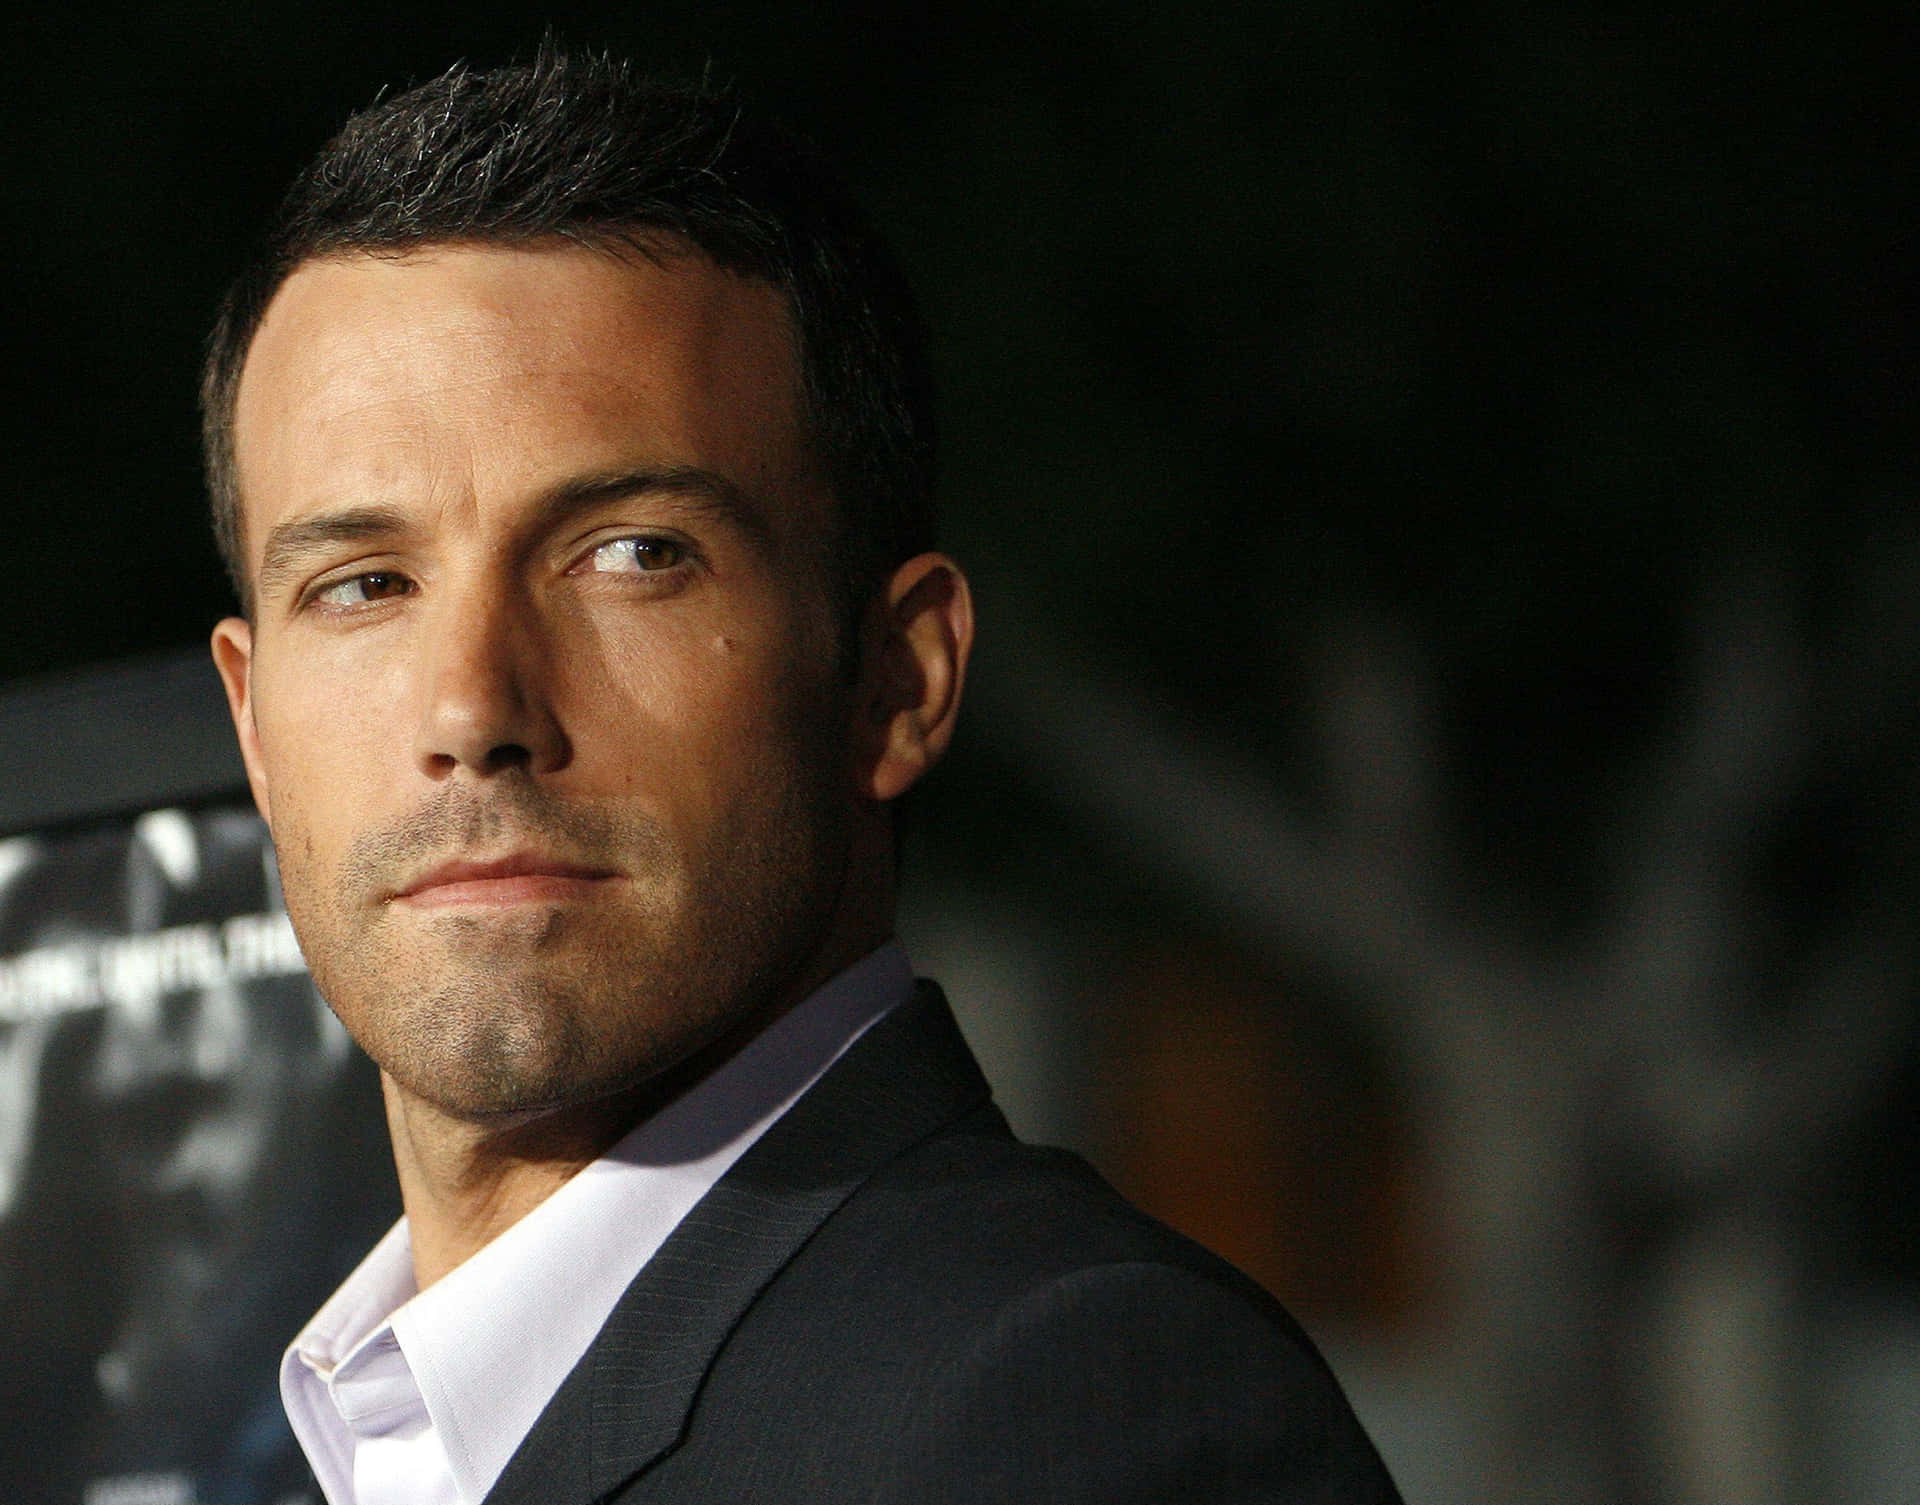 Ben Affleck takes a break from filming an upcoming project